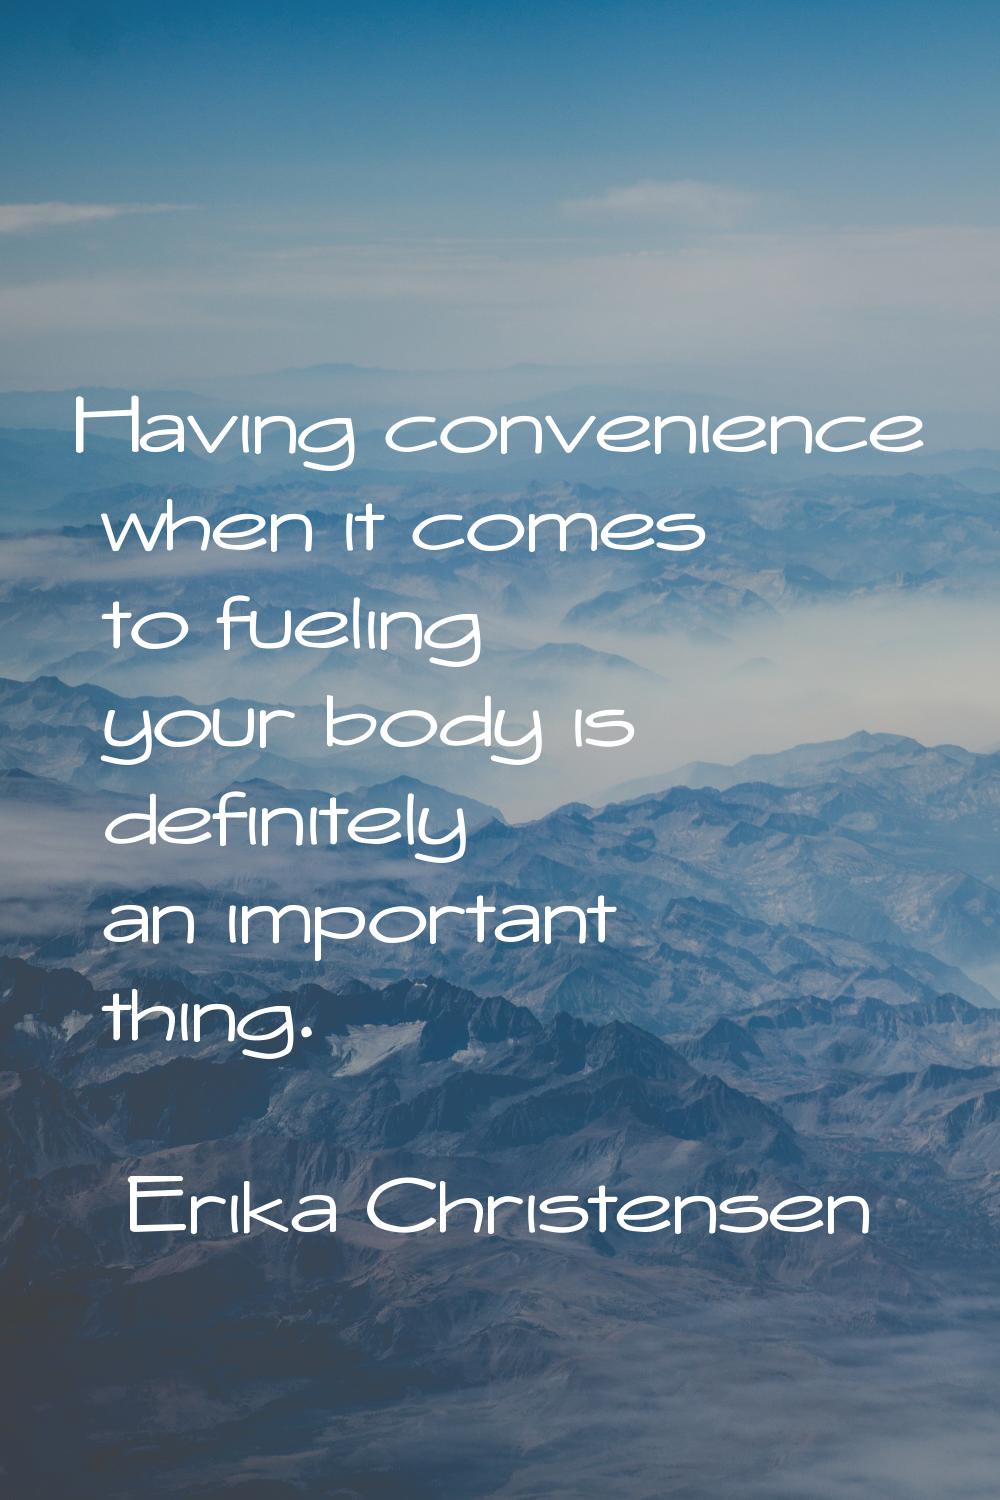 Having convenience when it comes to fueling your body is definitely an important thing.